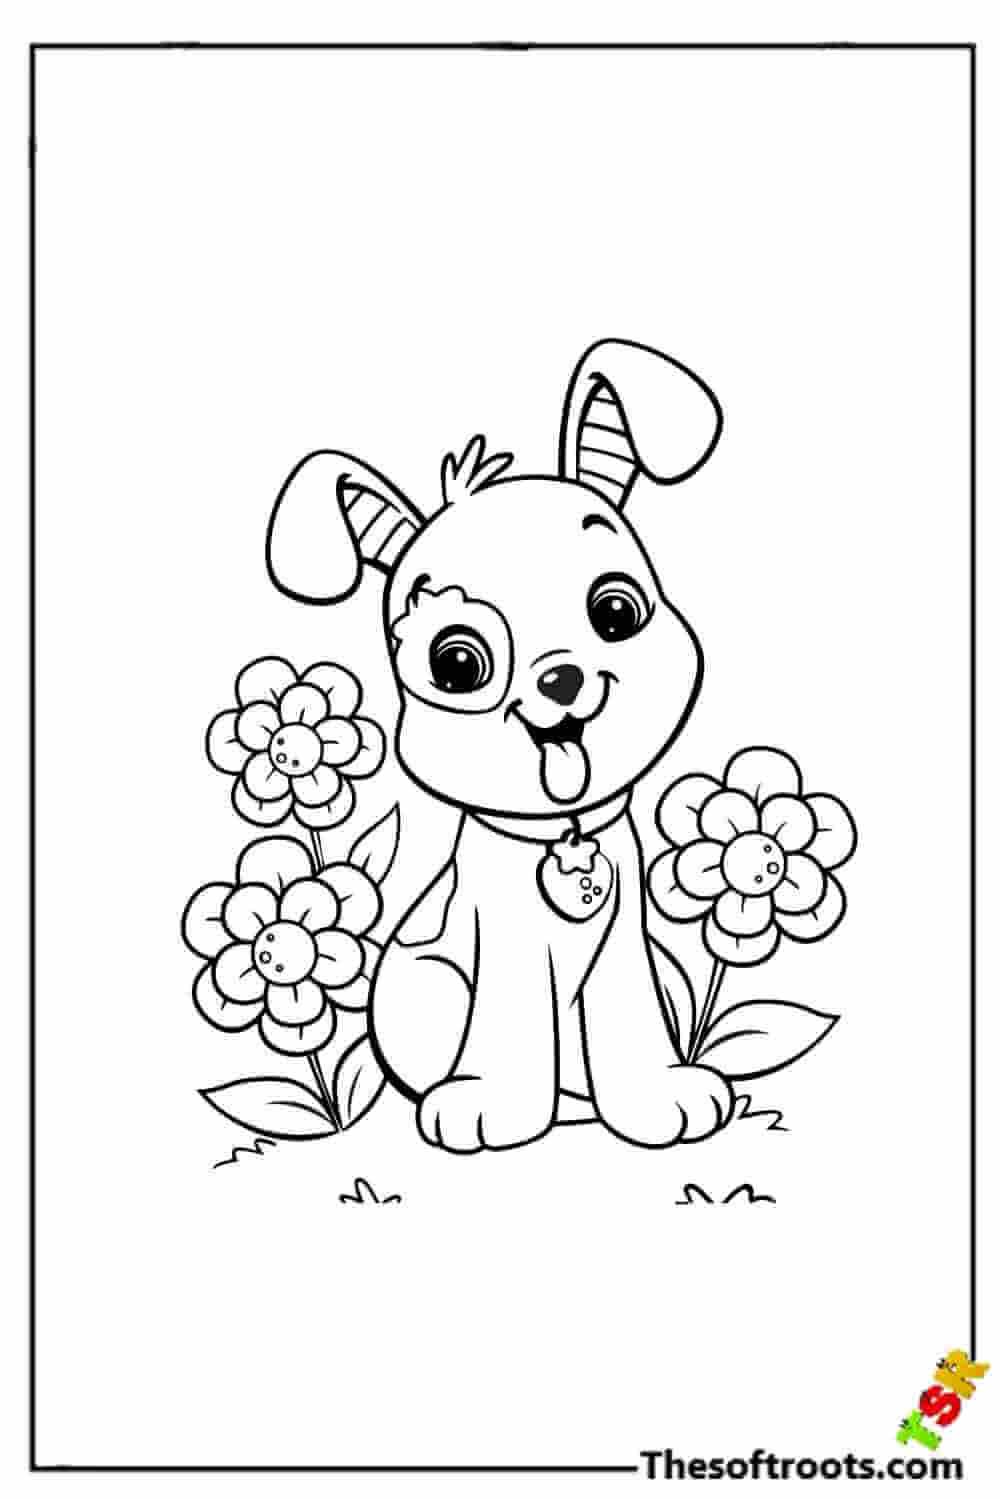 Adorable puppy coloring pages